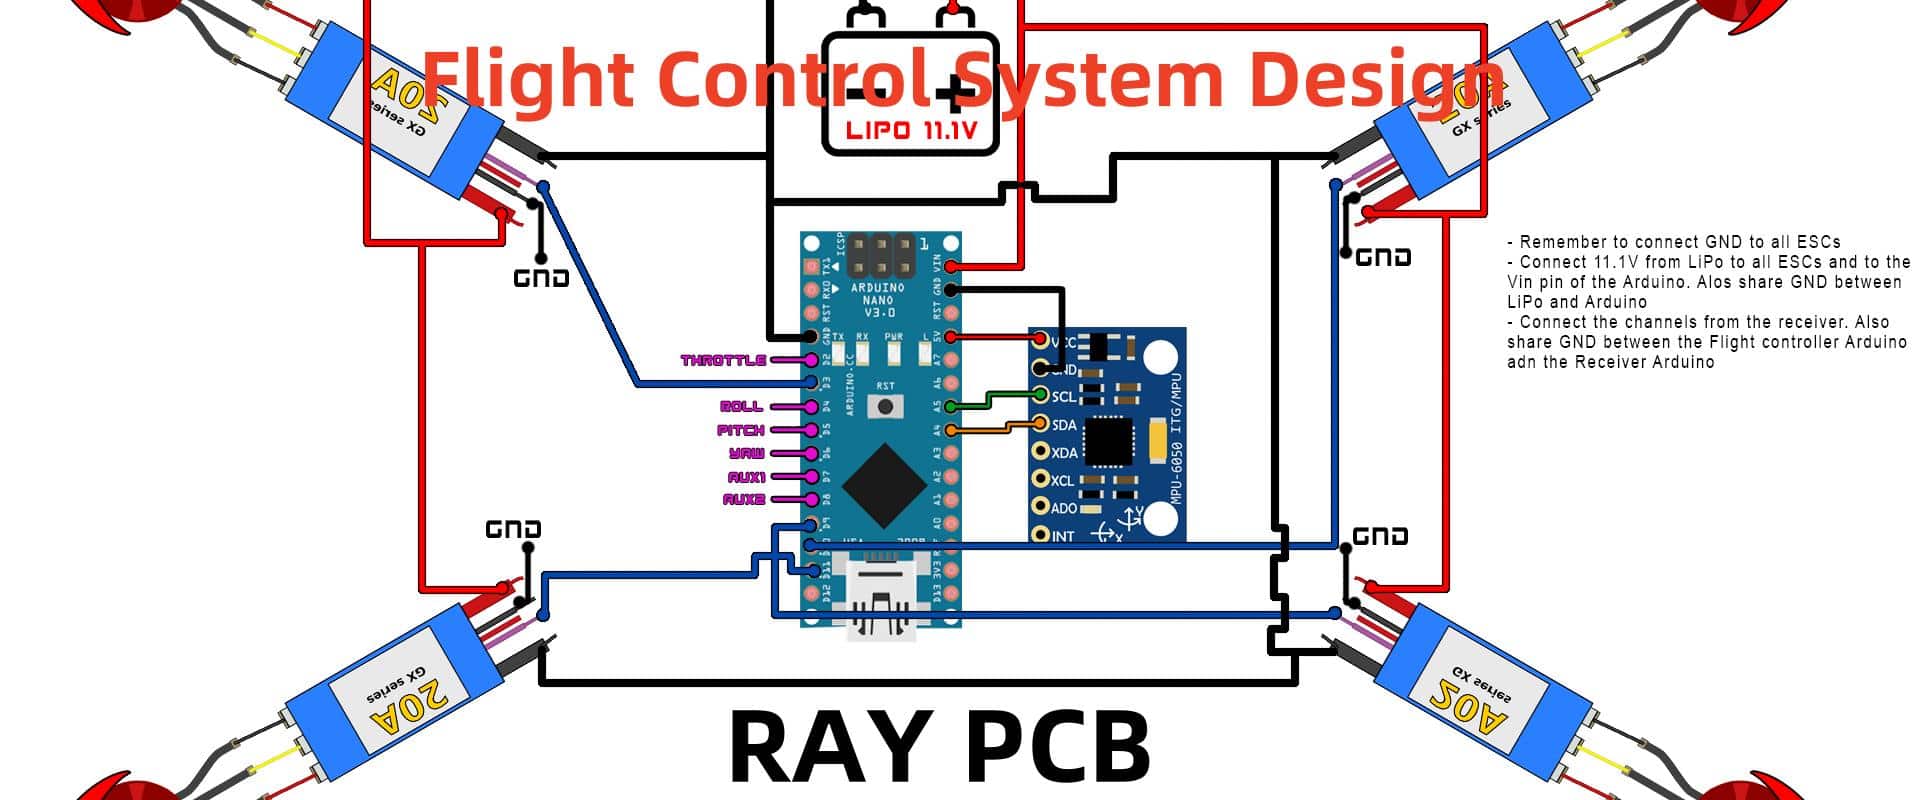 Flight Control System Design: Hardware and PCB Design By KiCAD